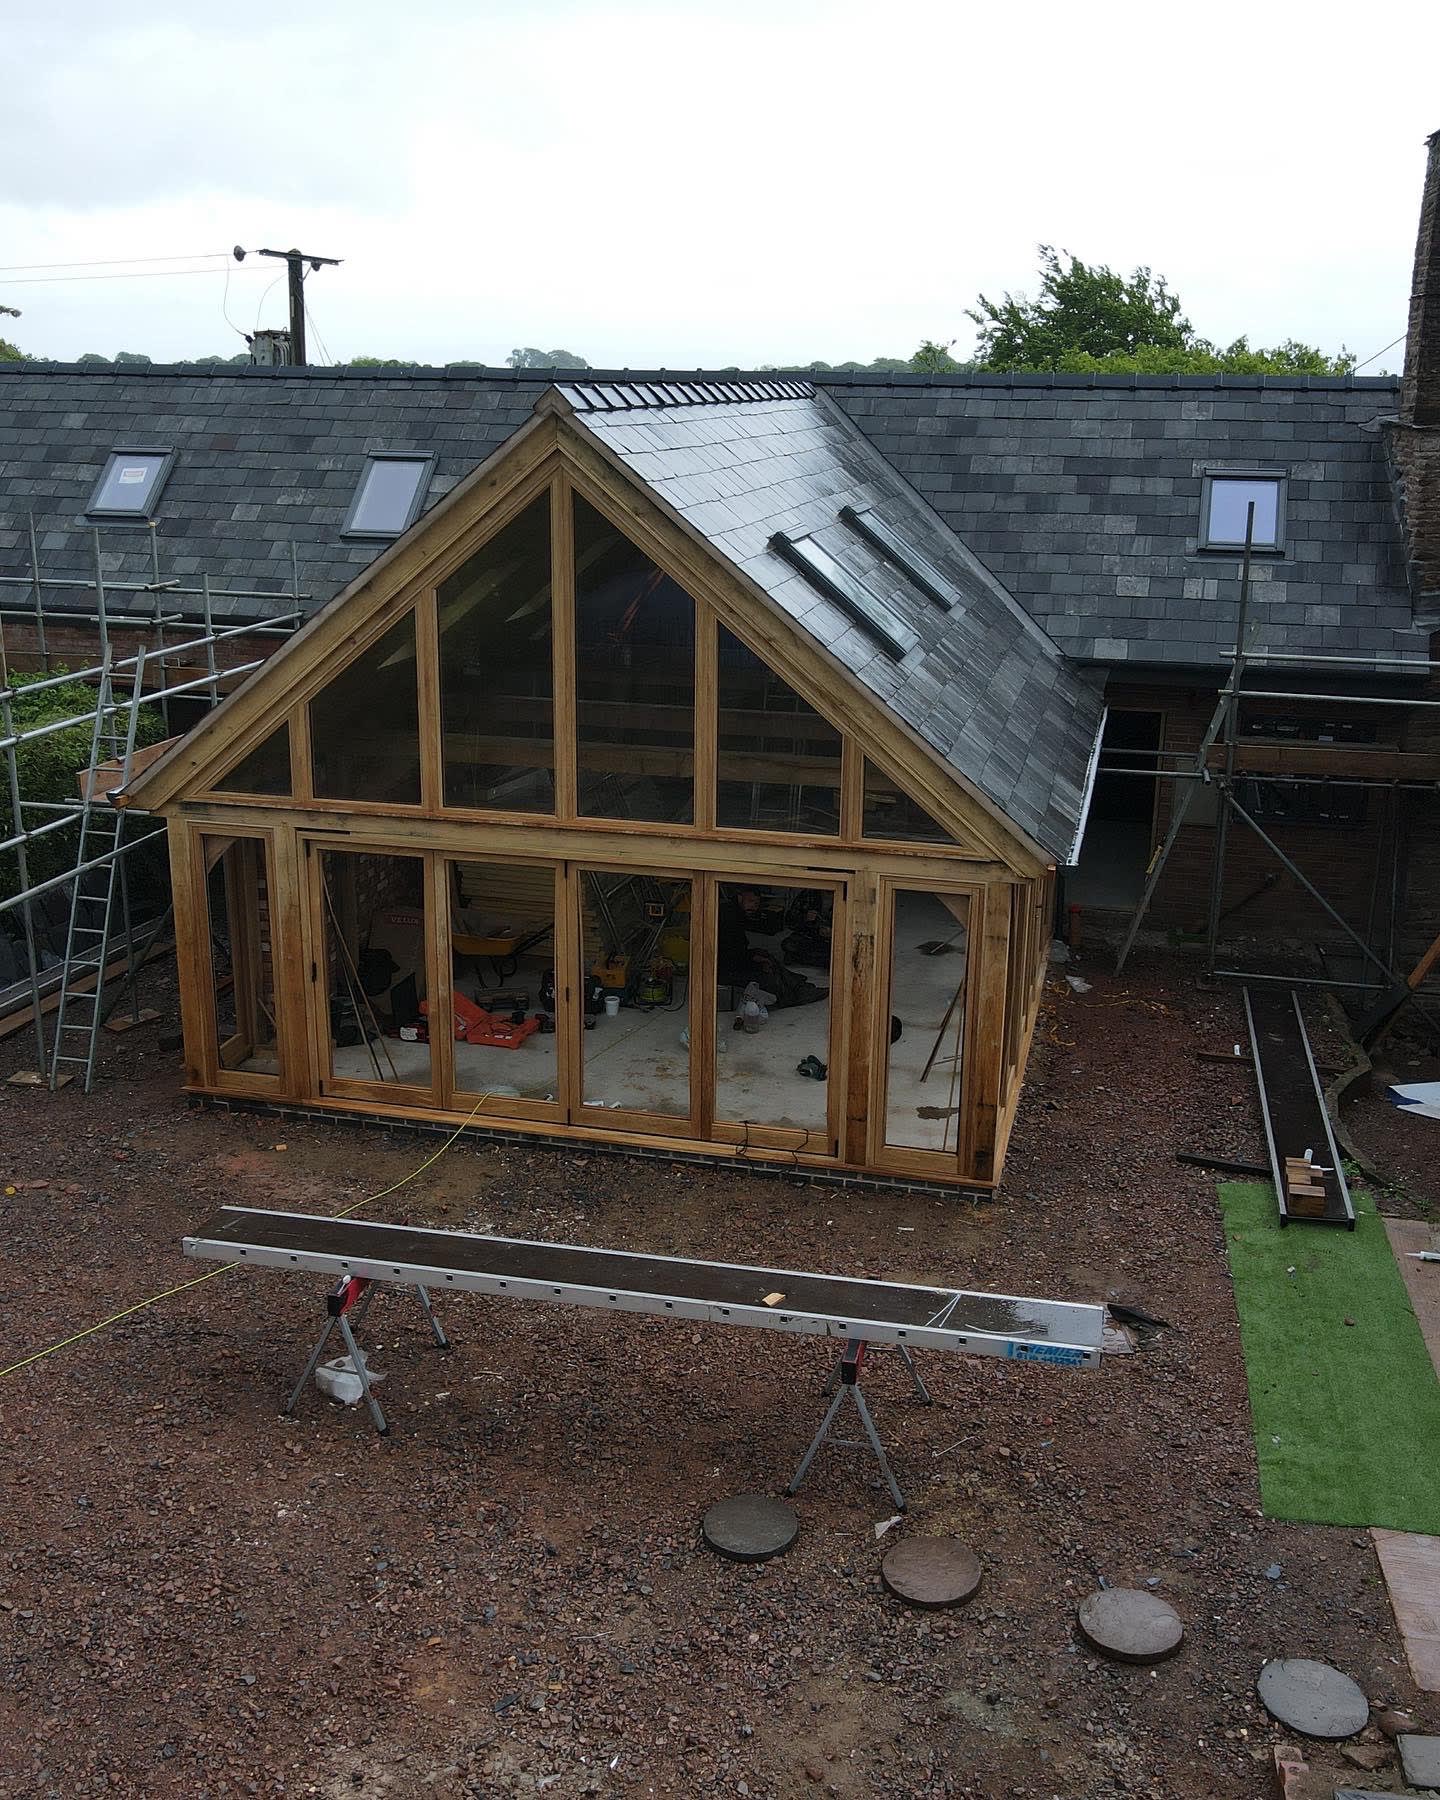 Images Lewis Roofing Solutions Ltd